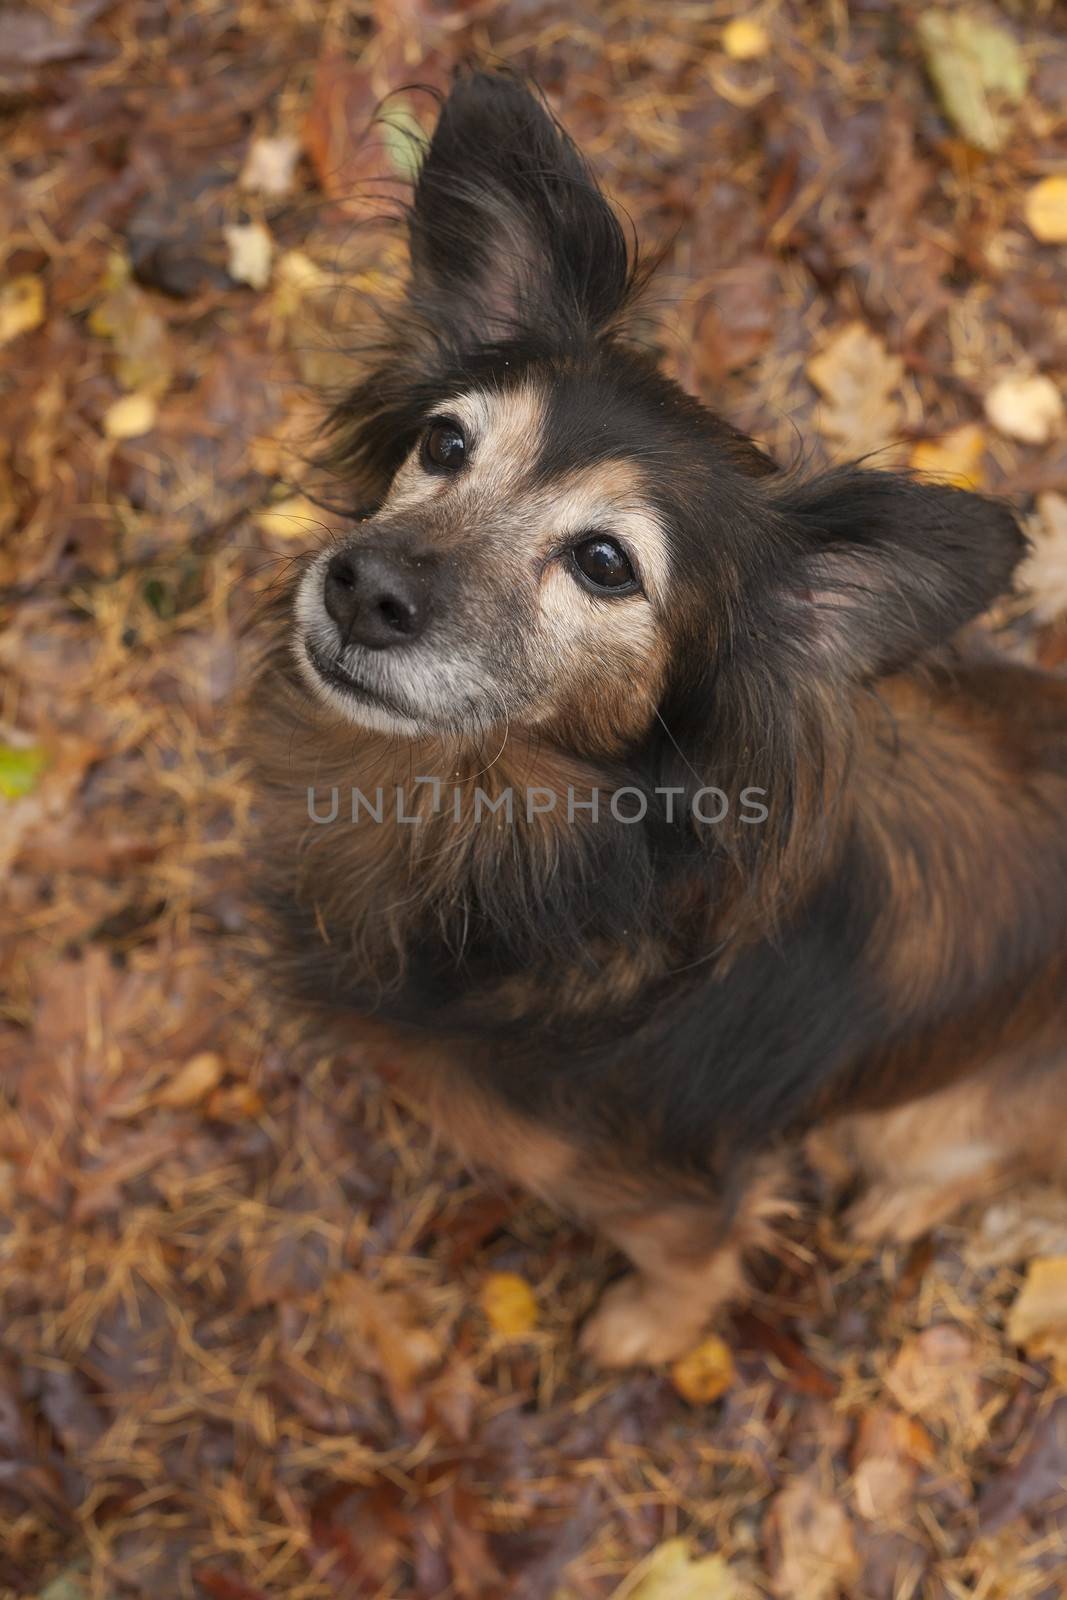 Obedience dog n the autumn by DNFStyle